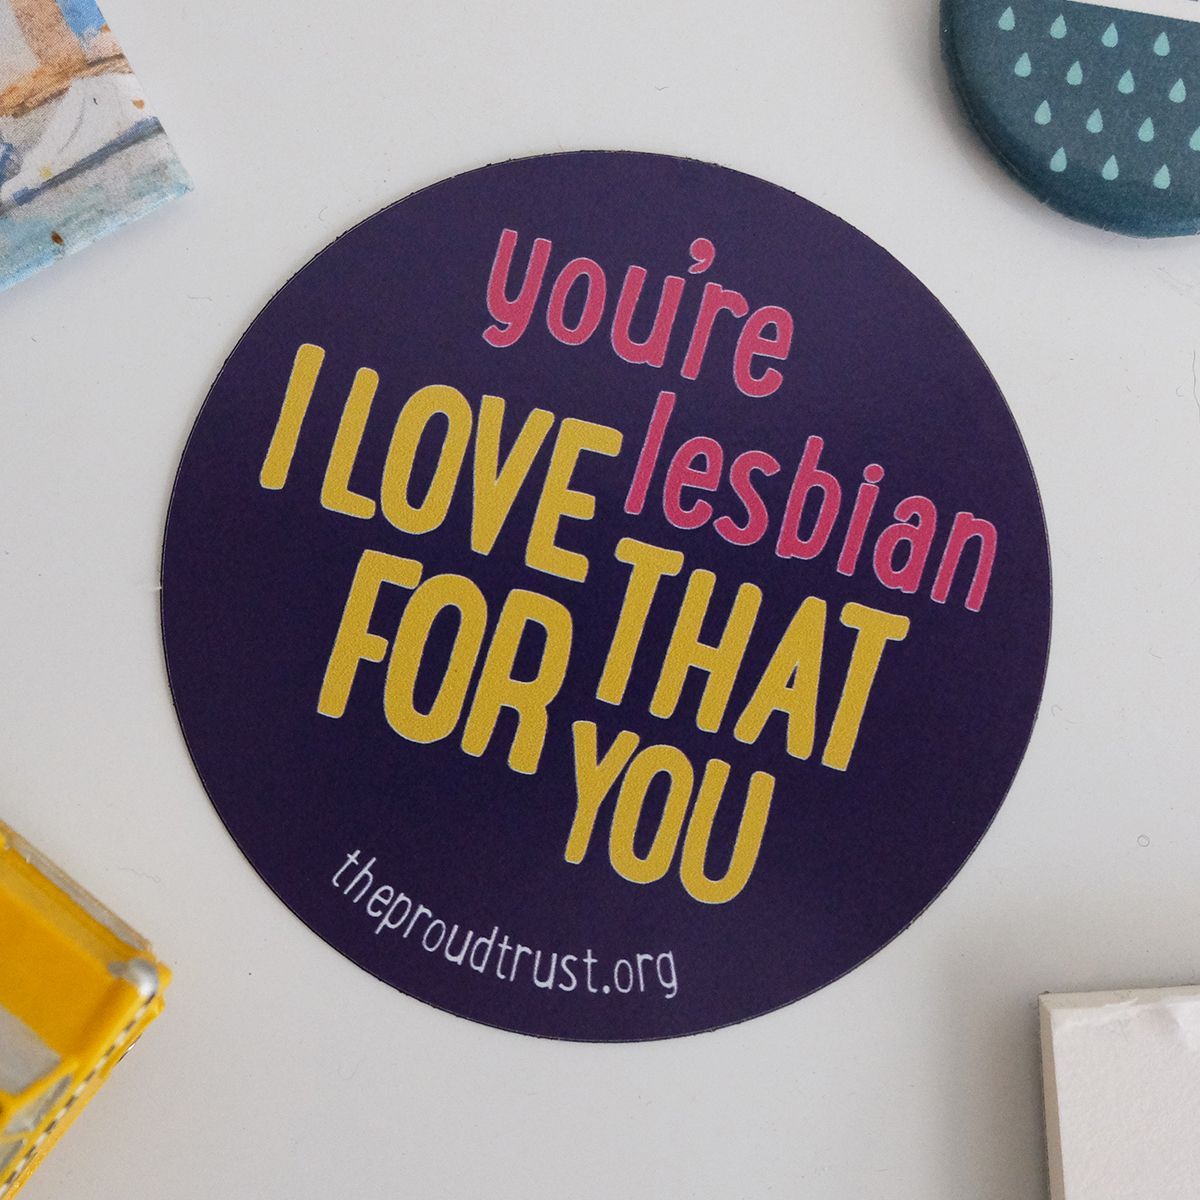 🌈 ✨ Happy #InternationalLesbianVisbilityDay to all the lesbians in our community! You're amazing, #BeProud of who you are! 🧡🤍💗 Visit our website for more info about lesbian identity: buff.ly/3IMIFqj